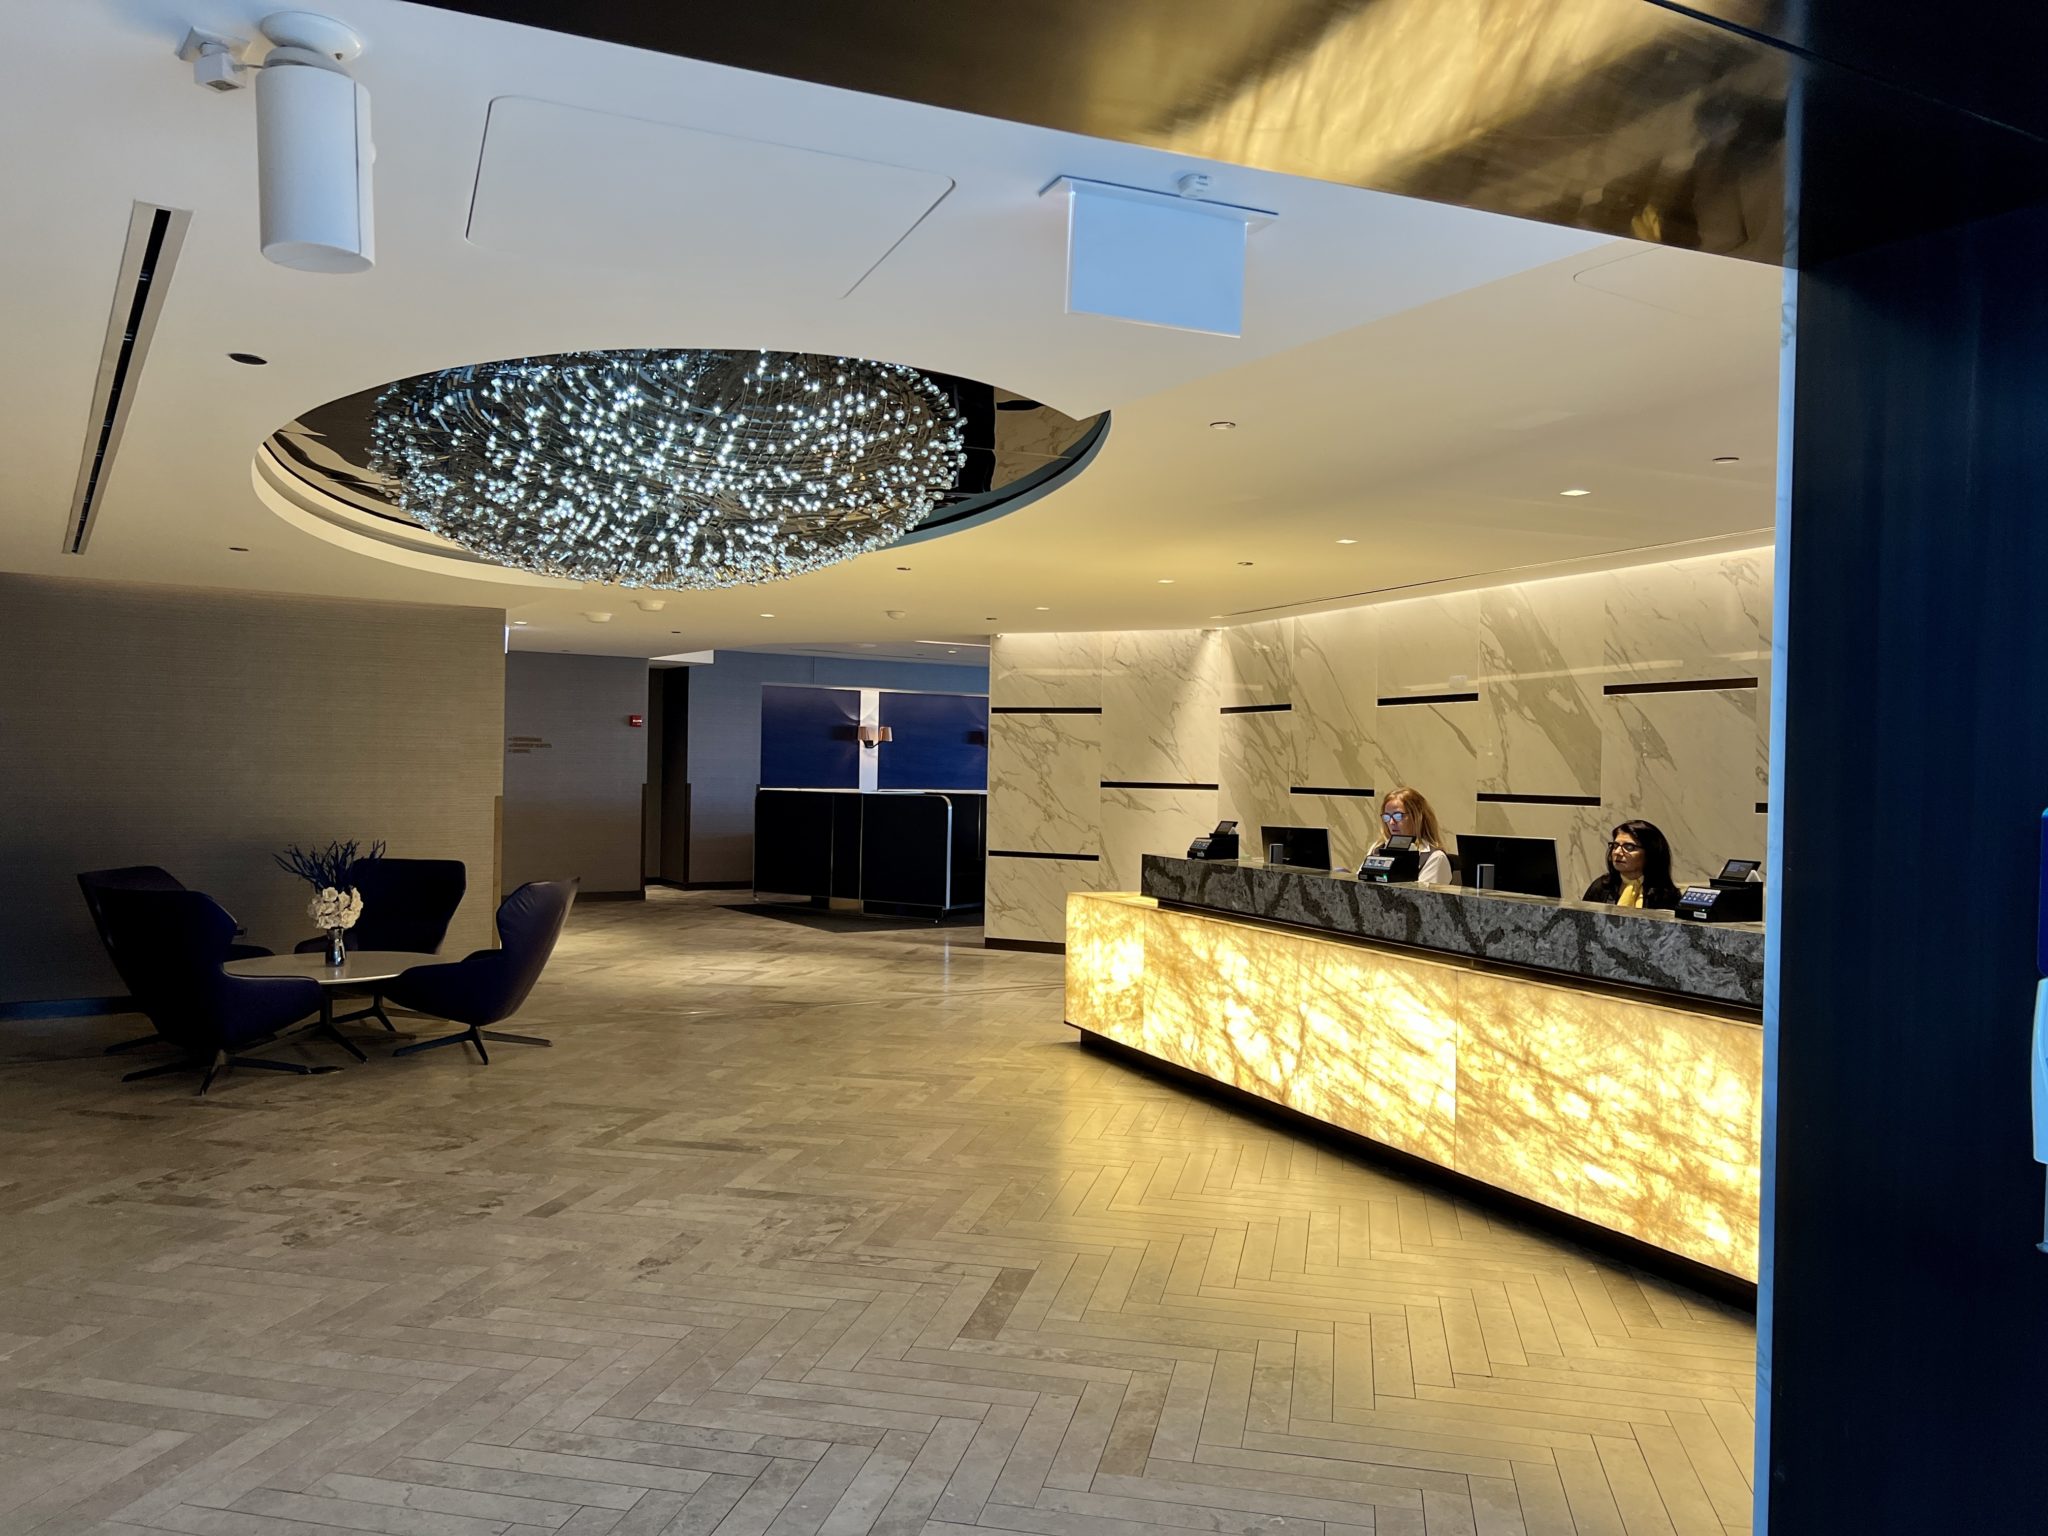 review-united-polaris-lounge-chicago-ord-thrifty-traveler